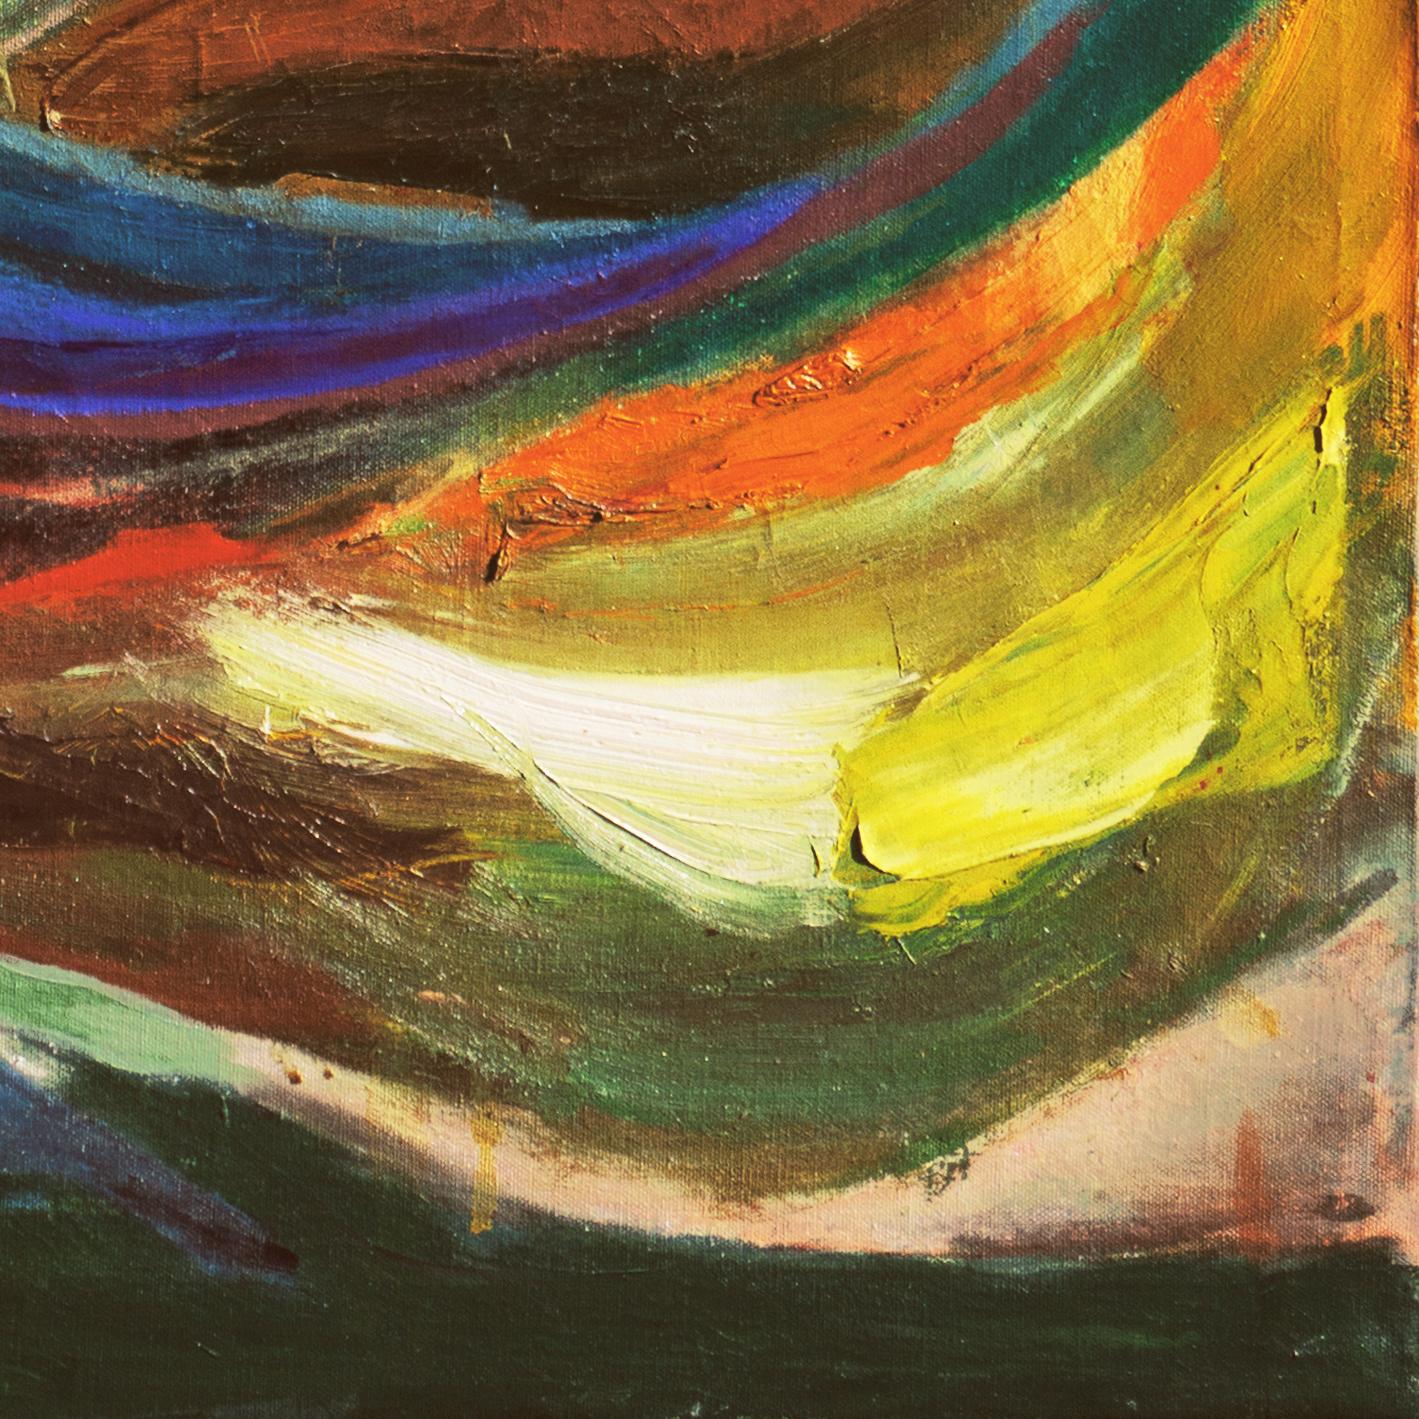 'Organic Abstract', 1950's Woman Artist, San Francisco Bay Area Abstraction - Painting by Dora Masters